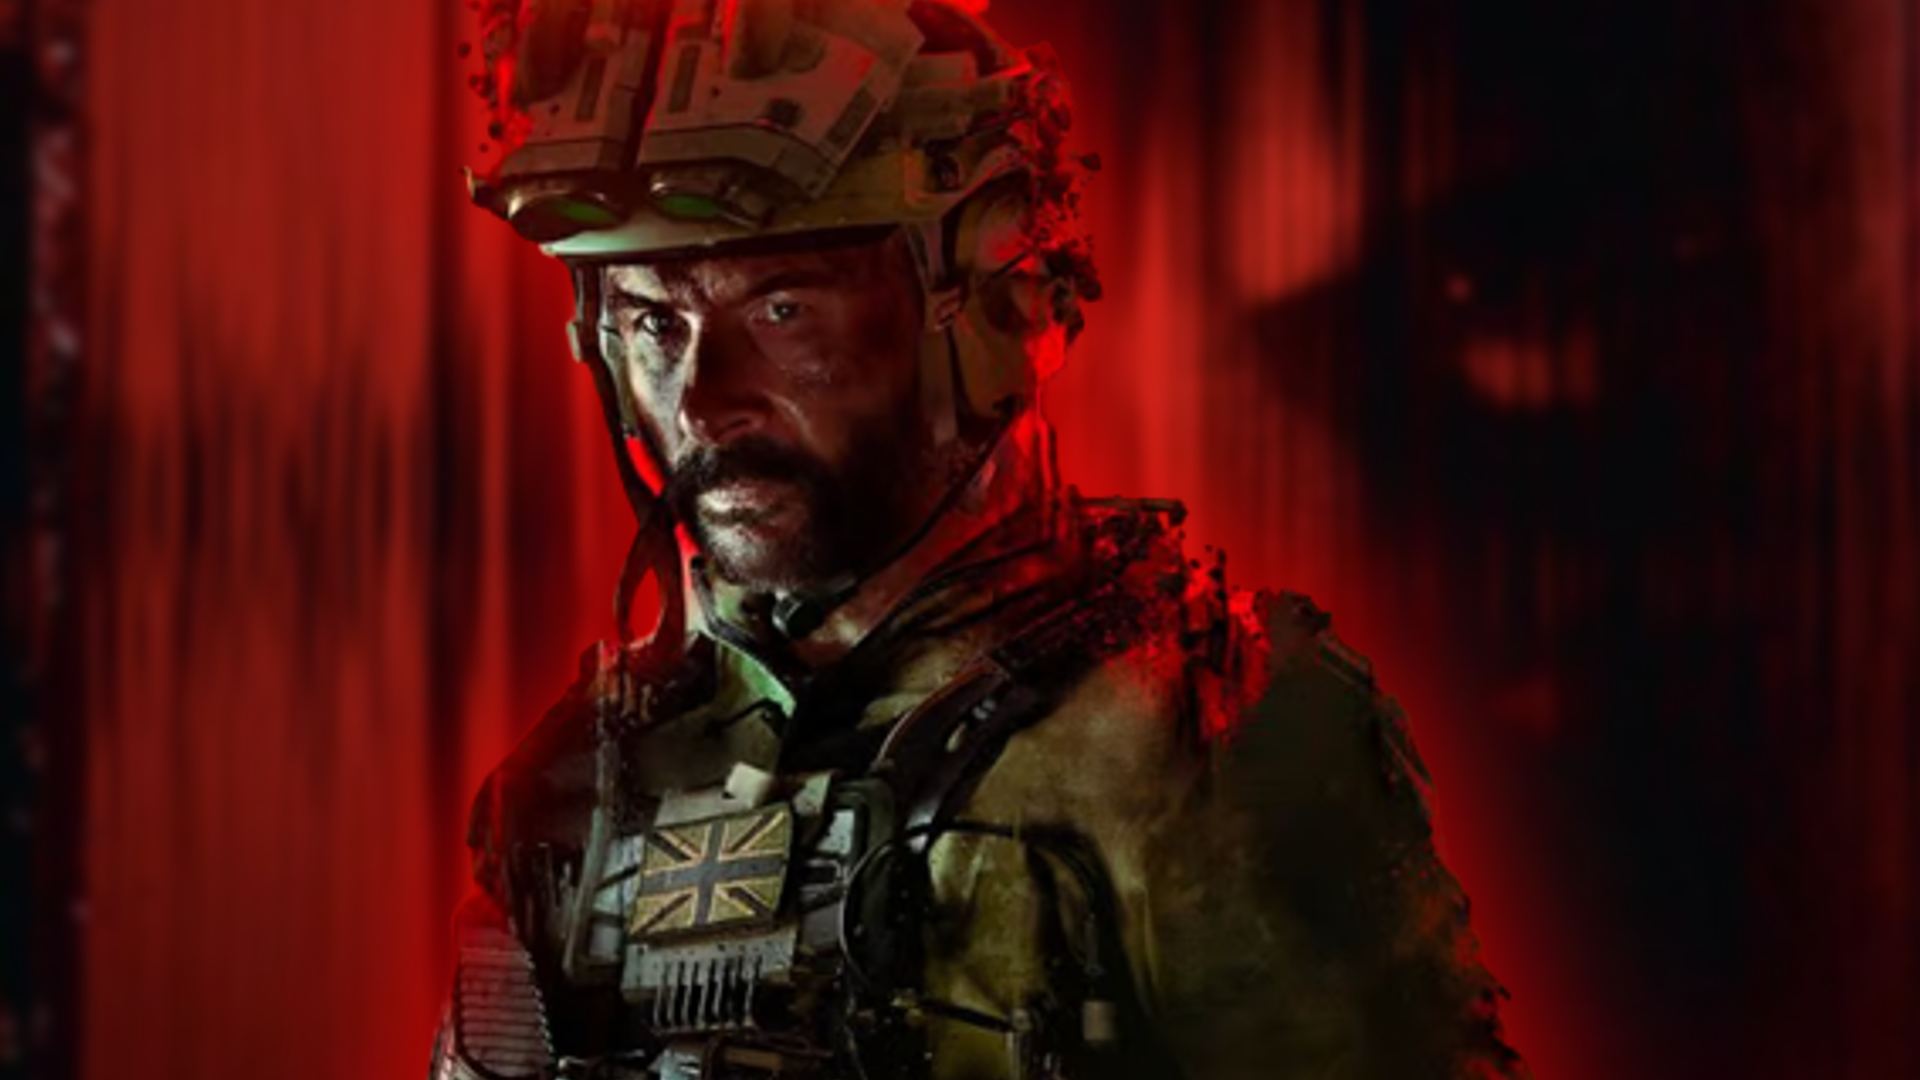 Call of Duty Modern Warfare 3 campaign 2023 - setting, characters, and more